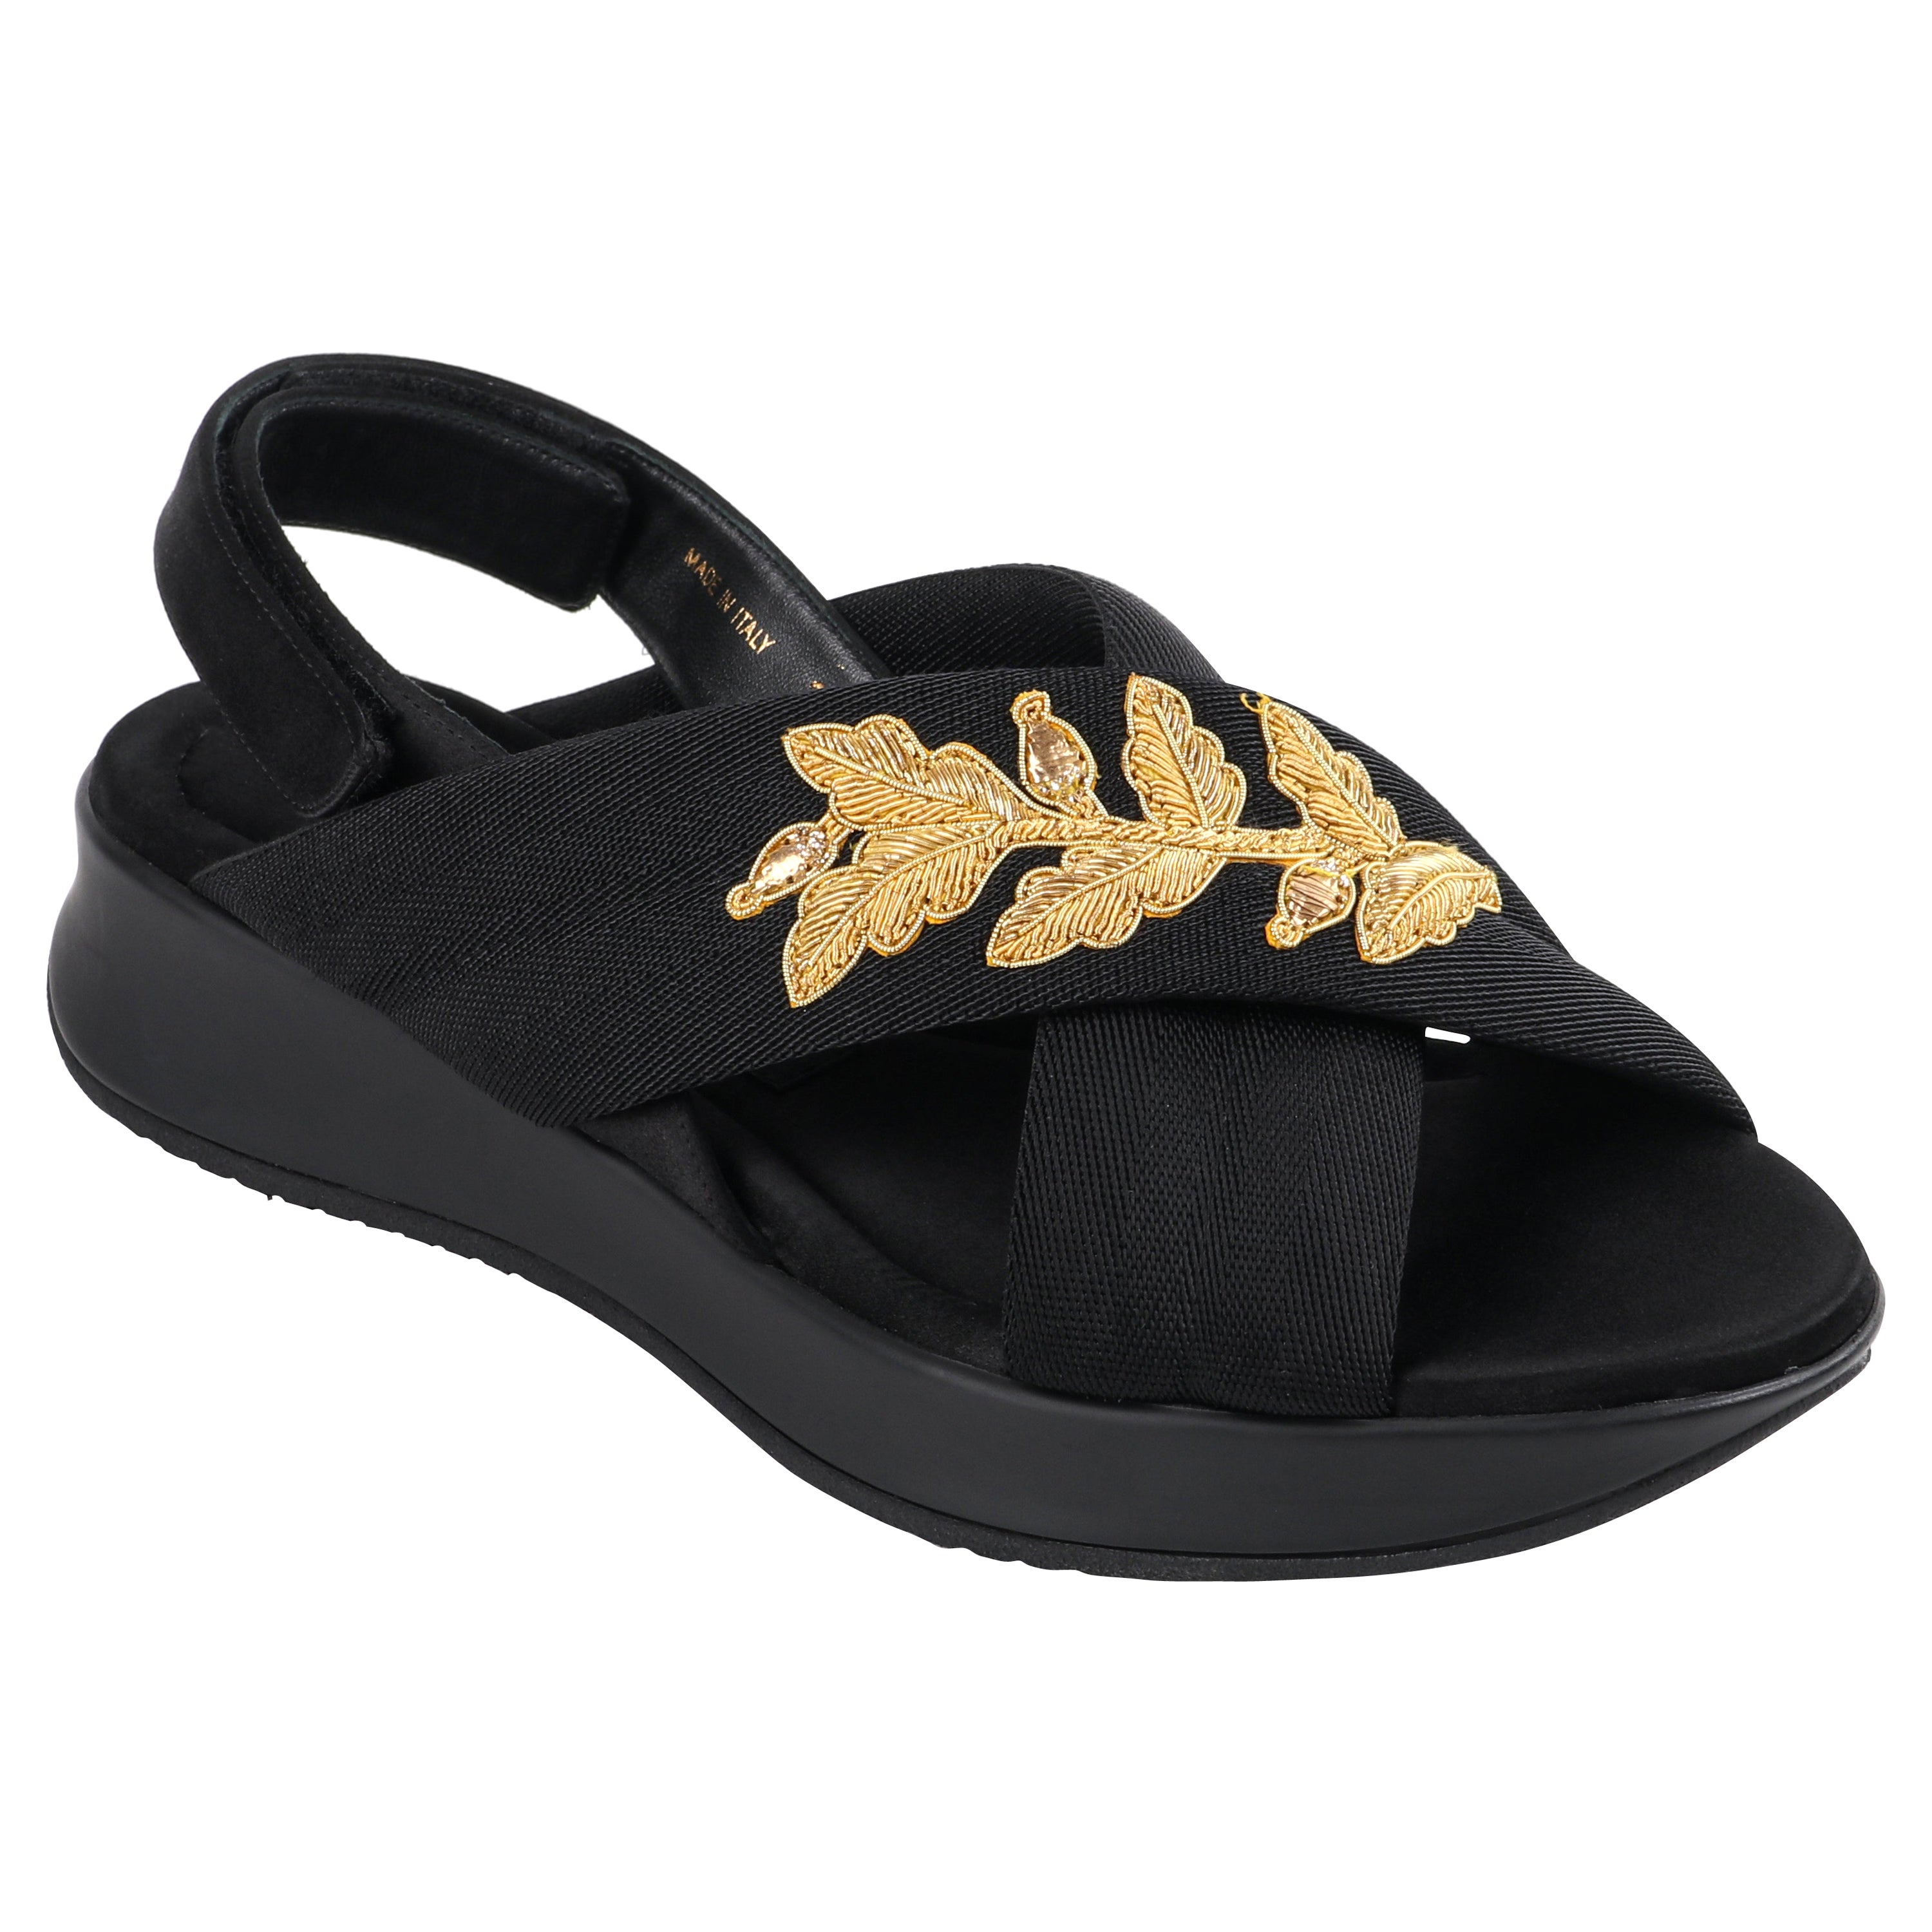 BURBERRY Prorsum S/S 2016 Criss Cross Embroidered Black Gold Adjustable Sandals  For Sale